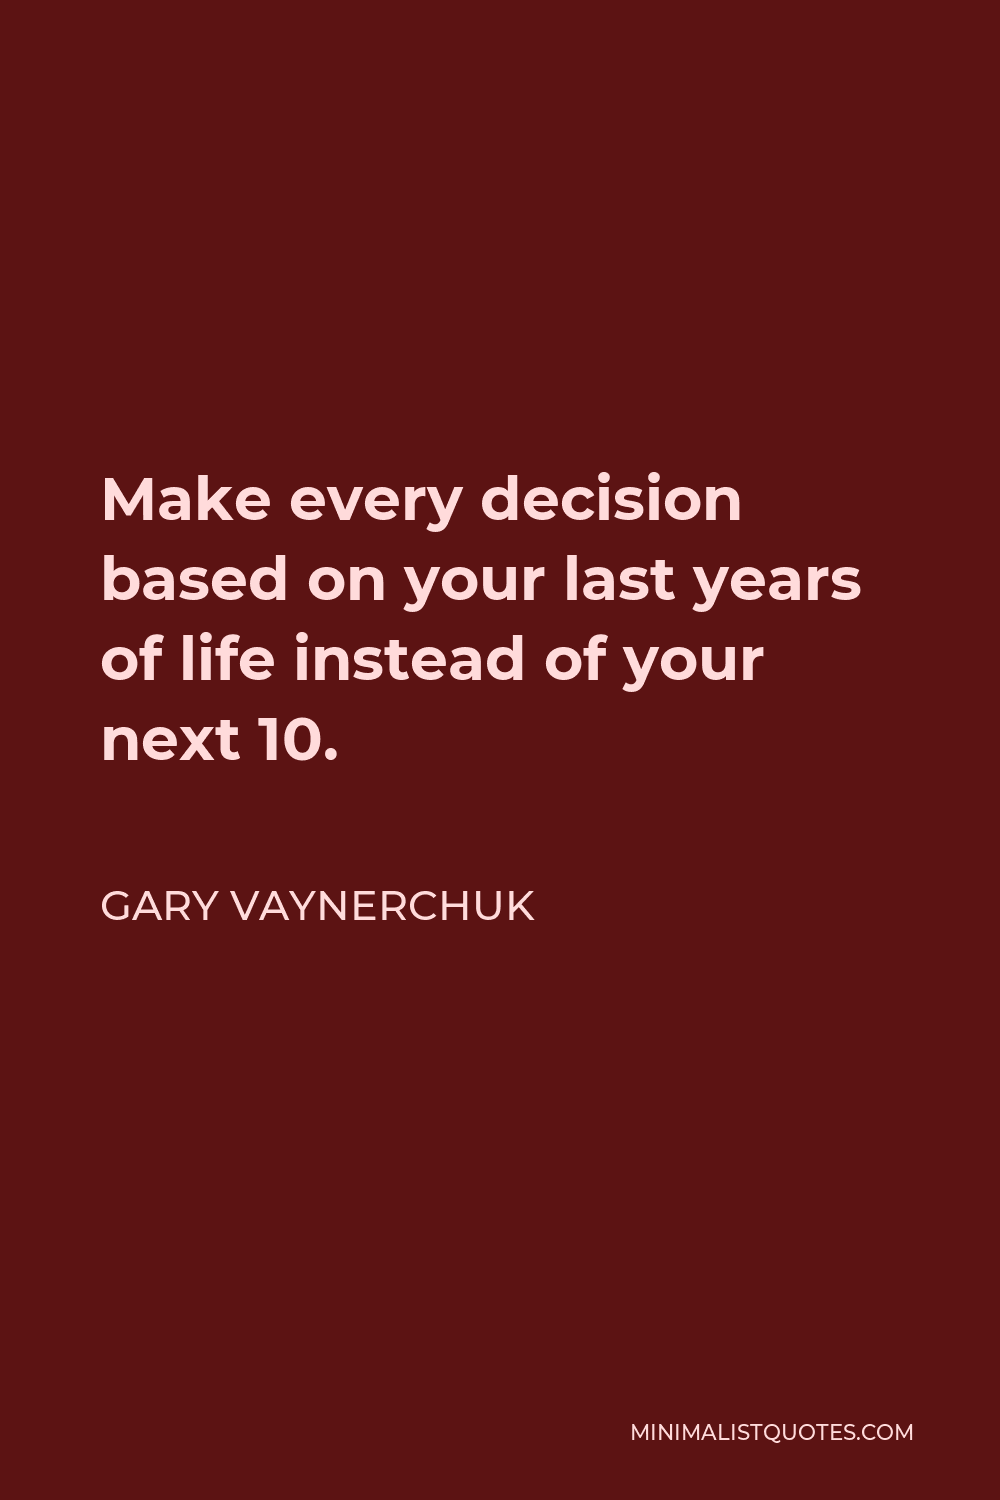 Gary Vaynerchuk Quote - Make every decision based on your last years of life instead of your next 10.